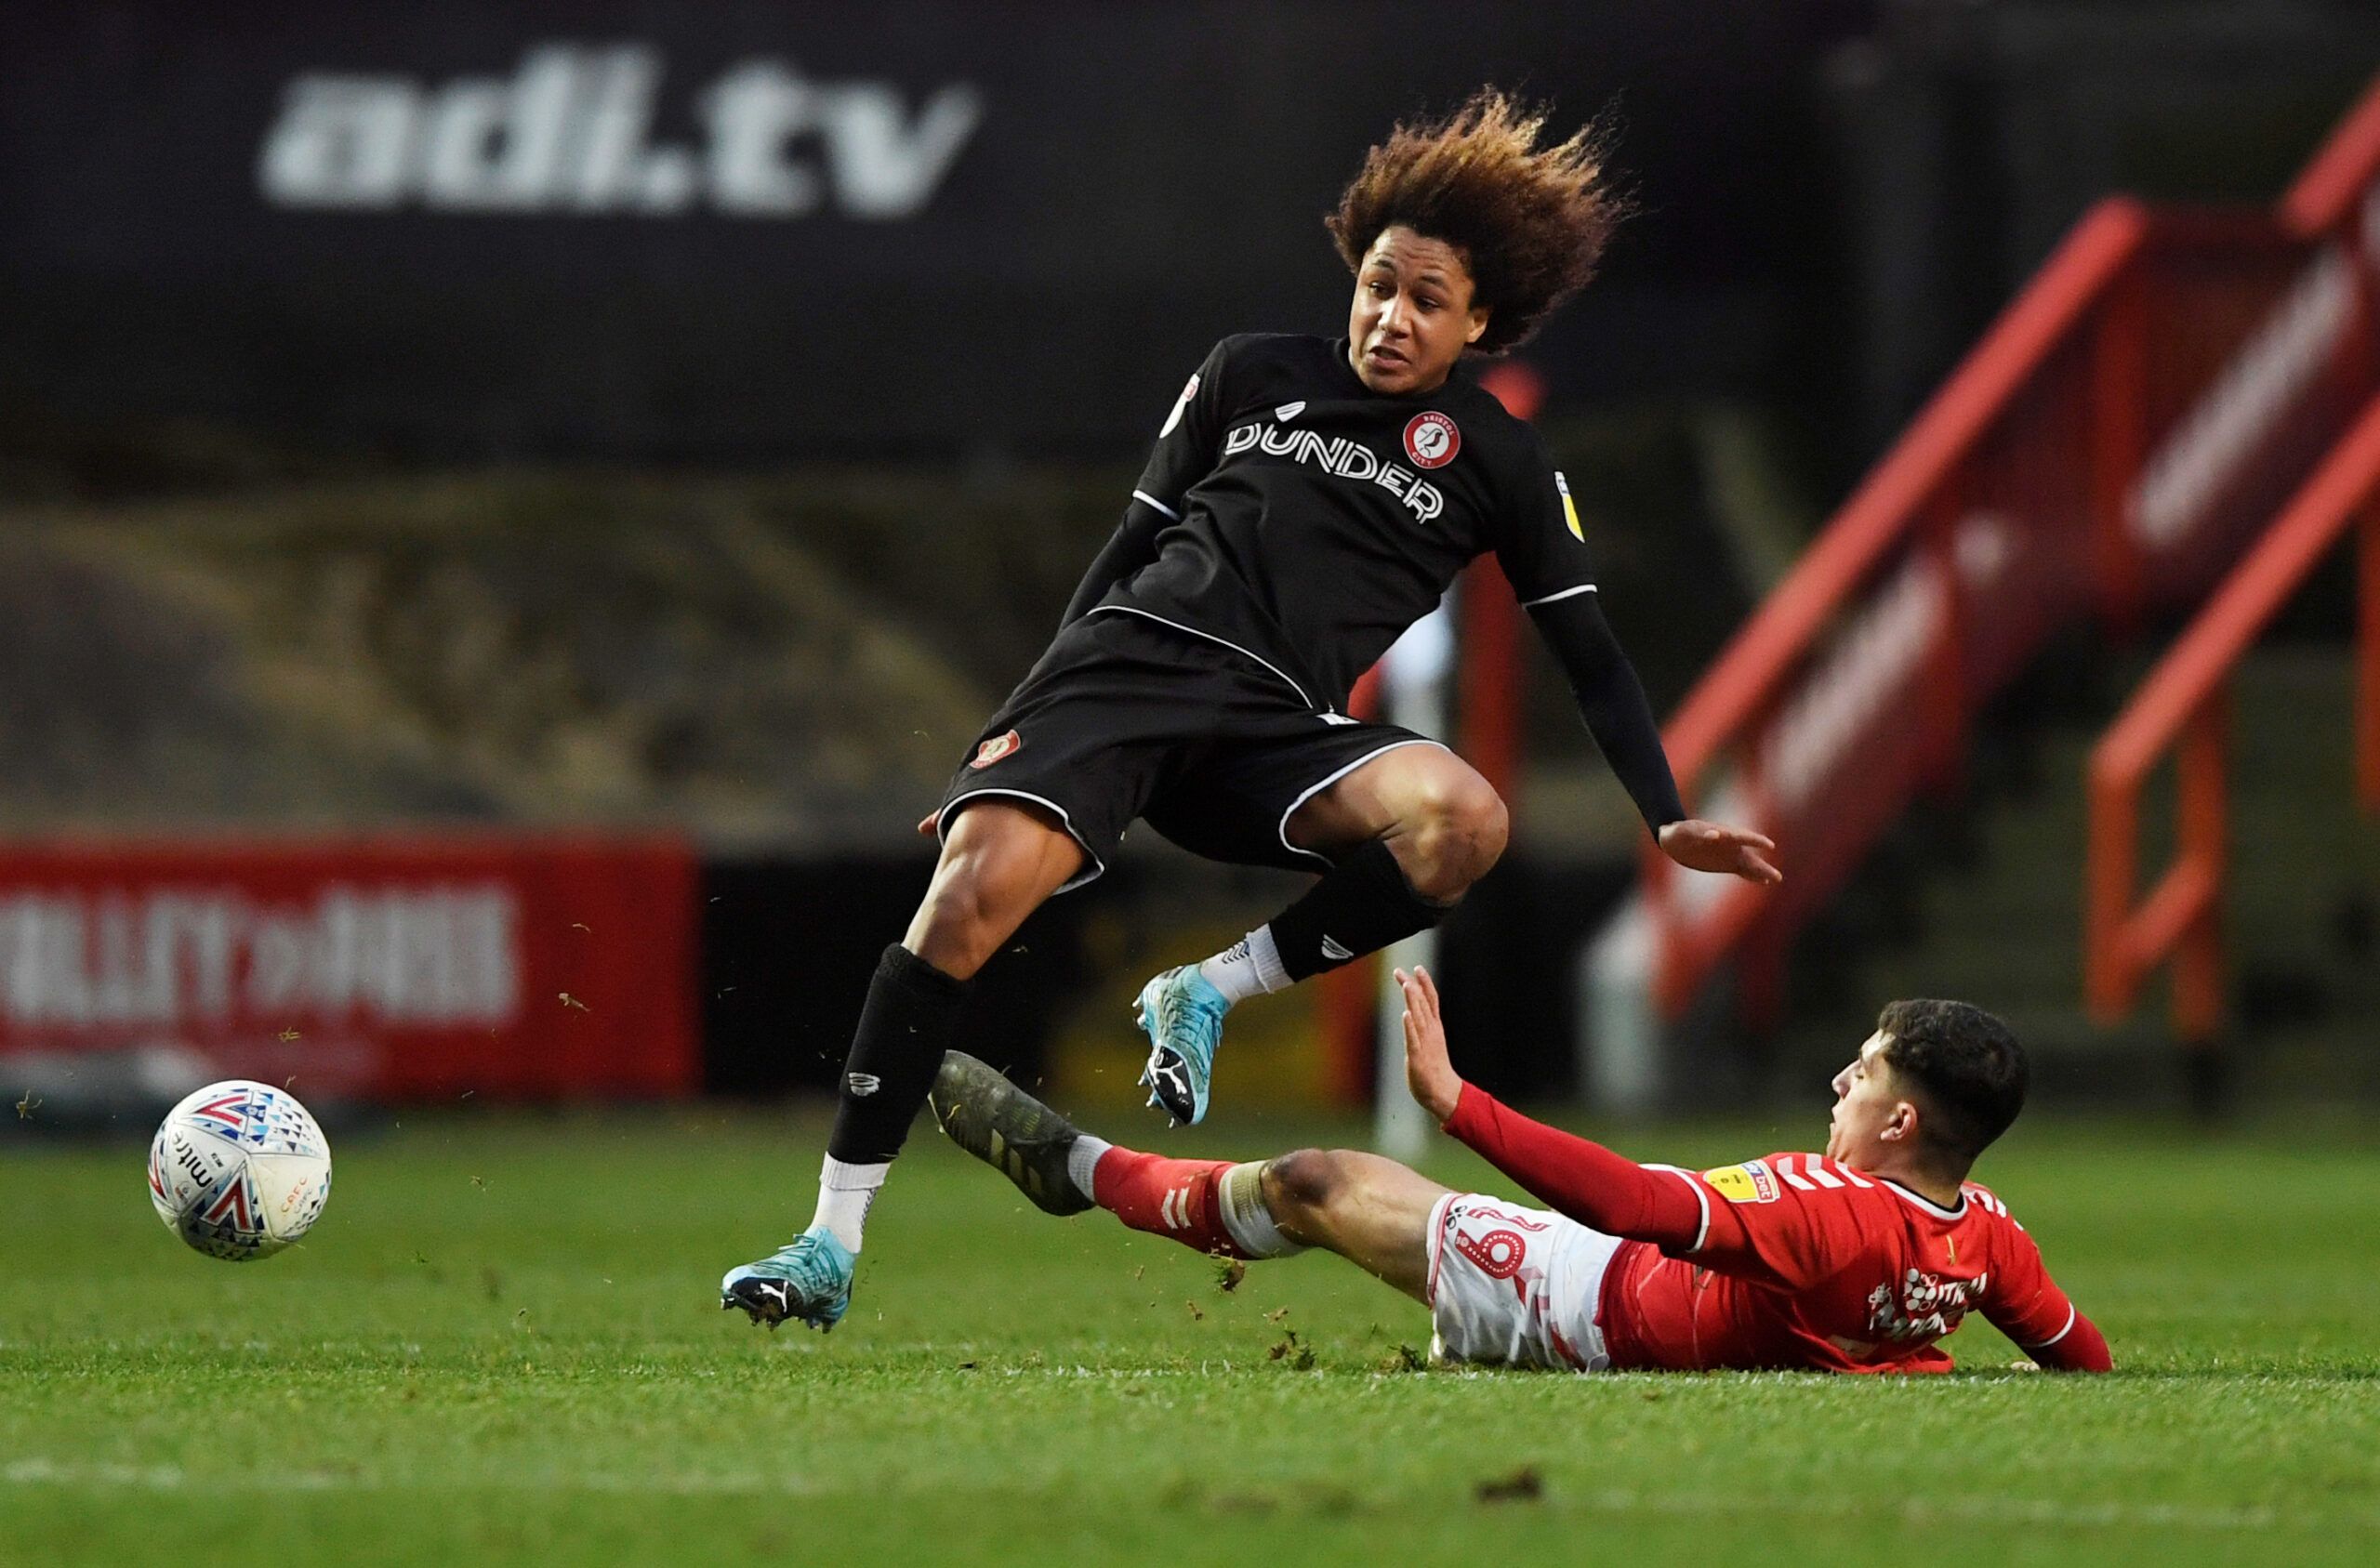 Soccer Football - Championship - Charlton Athletic v Bristol City - The Valley, London, Britain - December 26, 2019  Charlton's Albie Morgan in action with Bristol City's Han Noah Massengo  Action Images/Tony O'Brien  EDITORIAL USE ONLY. No use with unauthorized audio, video, data, fixture lists, club/league logos or 